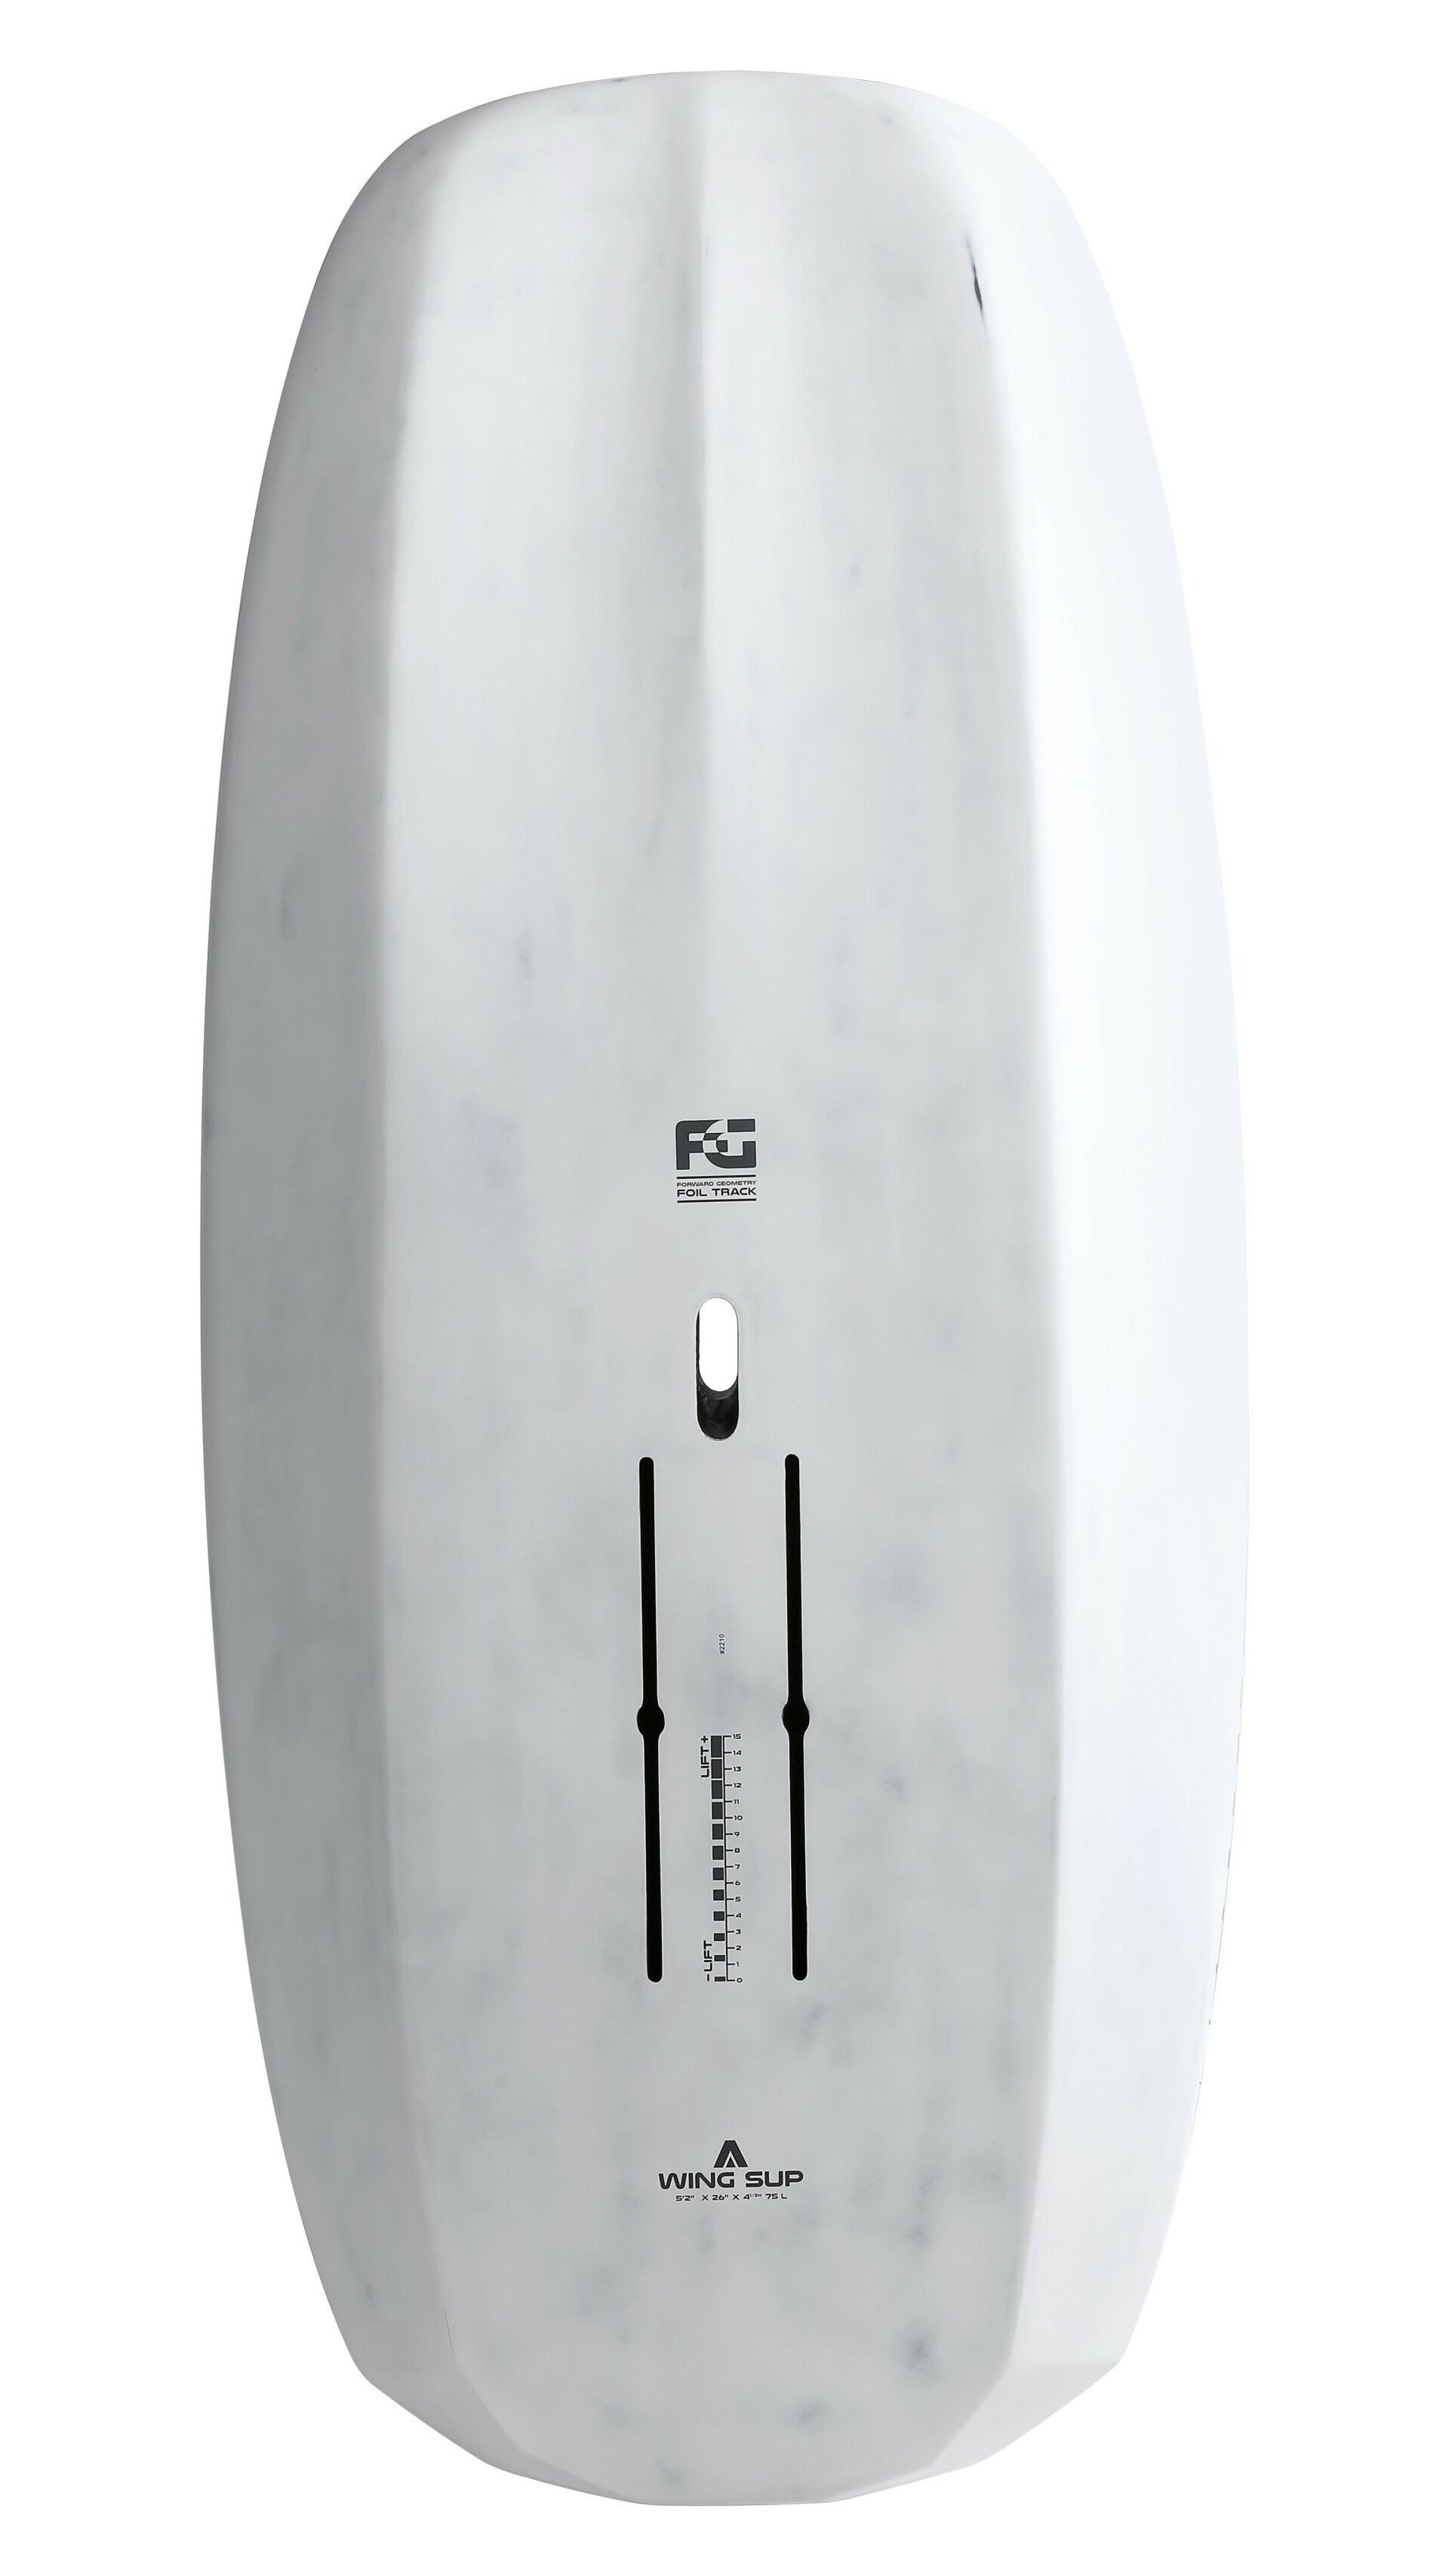 Armstrong Wingfoilboard 5'2, 75 Liter